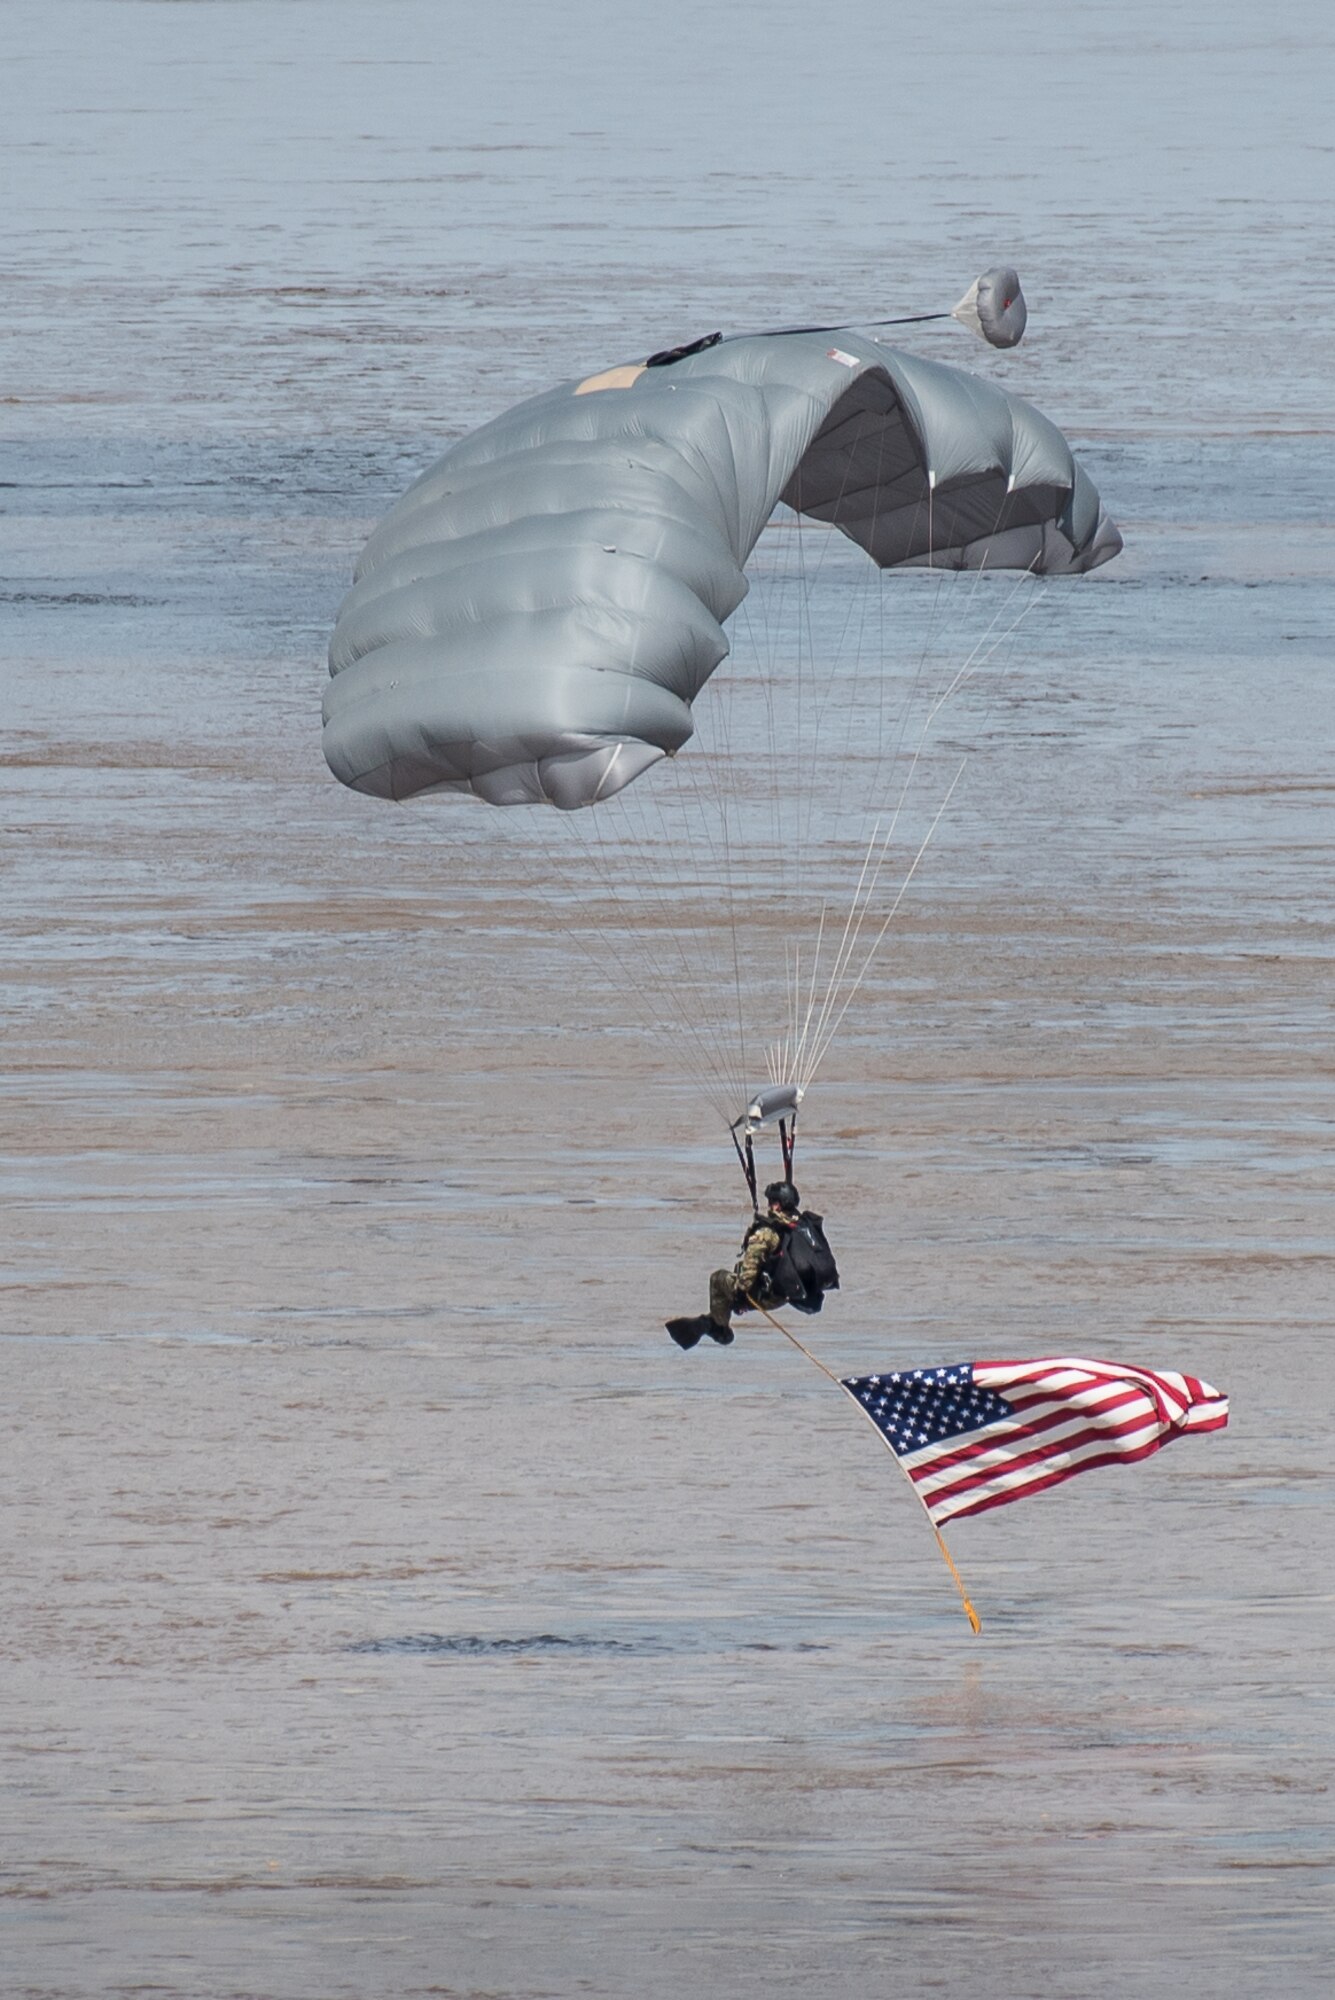 A special operator from the Kentucky Air National Guard’s 123rd Special Tactics Squadron parachutes into the Ohio River from a C-130 aircraft during the Thunder Over Louisville air show in Louisville, Ky., April 21, 2018. The squadron is comprised of combat controllers, pararescuemen, special operations weathermen and special tactics officers. (U.S. Air National Guard photo by Lt. Col. Dale Greer)